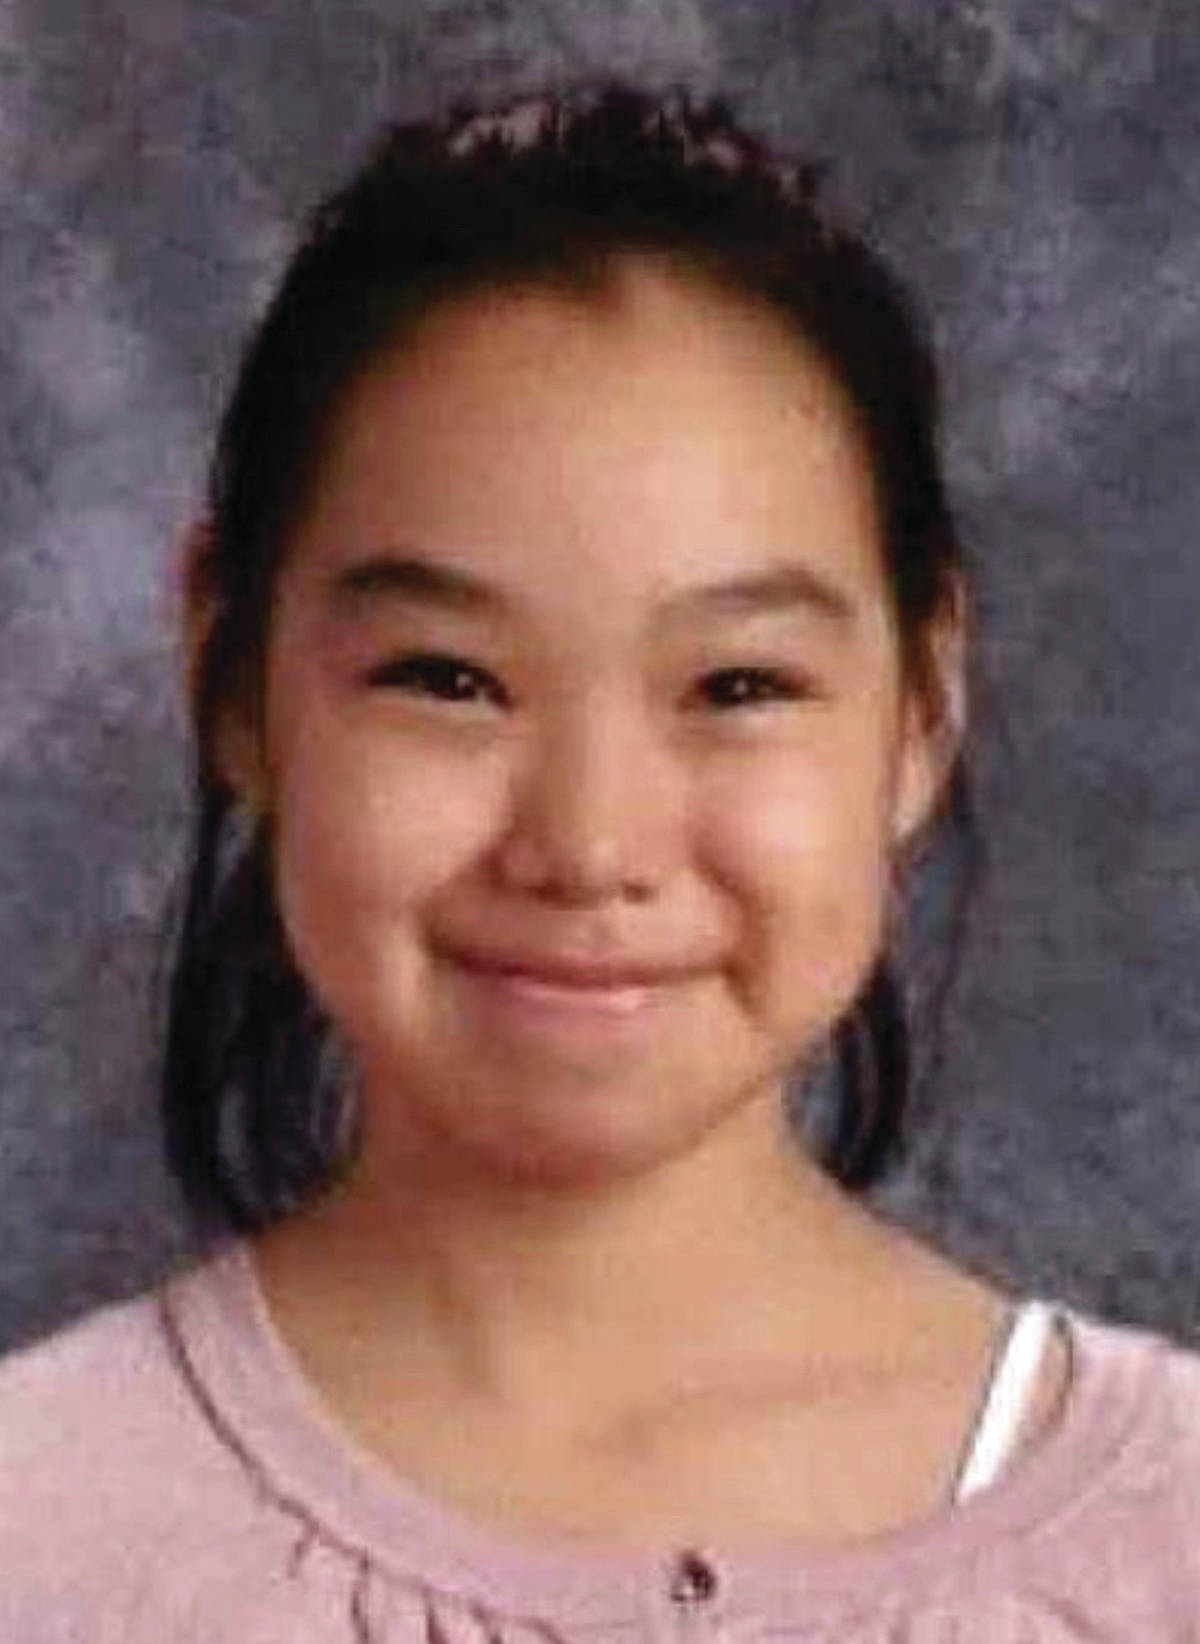 This undated file photo that is part of a missing person poster released by Alaska State Troopers shows Ashley Johnson-Barr. The 10-year-old girl was found dead Friday, Sept. 14, 2018 more than a week after she was reported missing in Kotzebue. (Alaska State Troopers via AP, File)